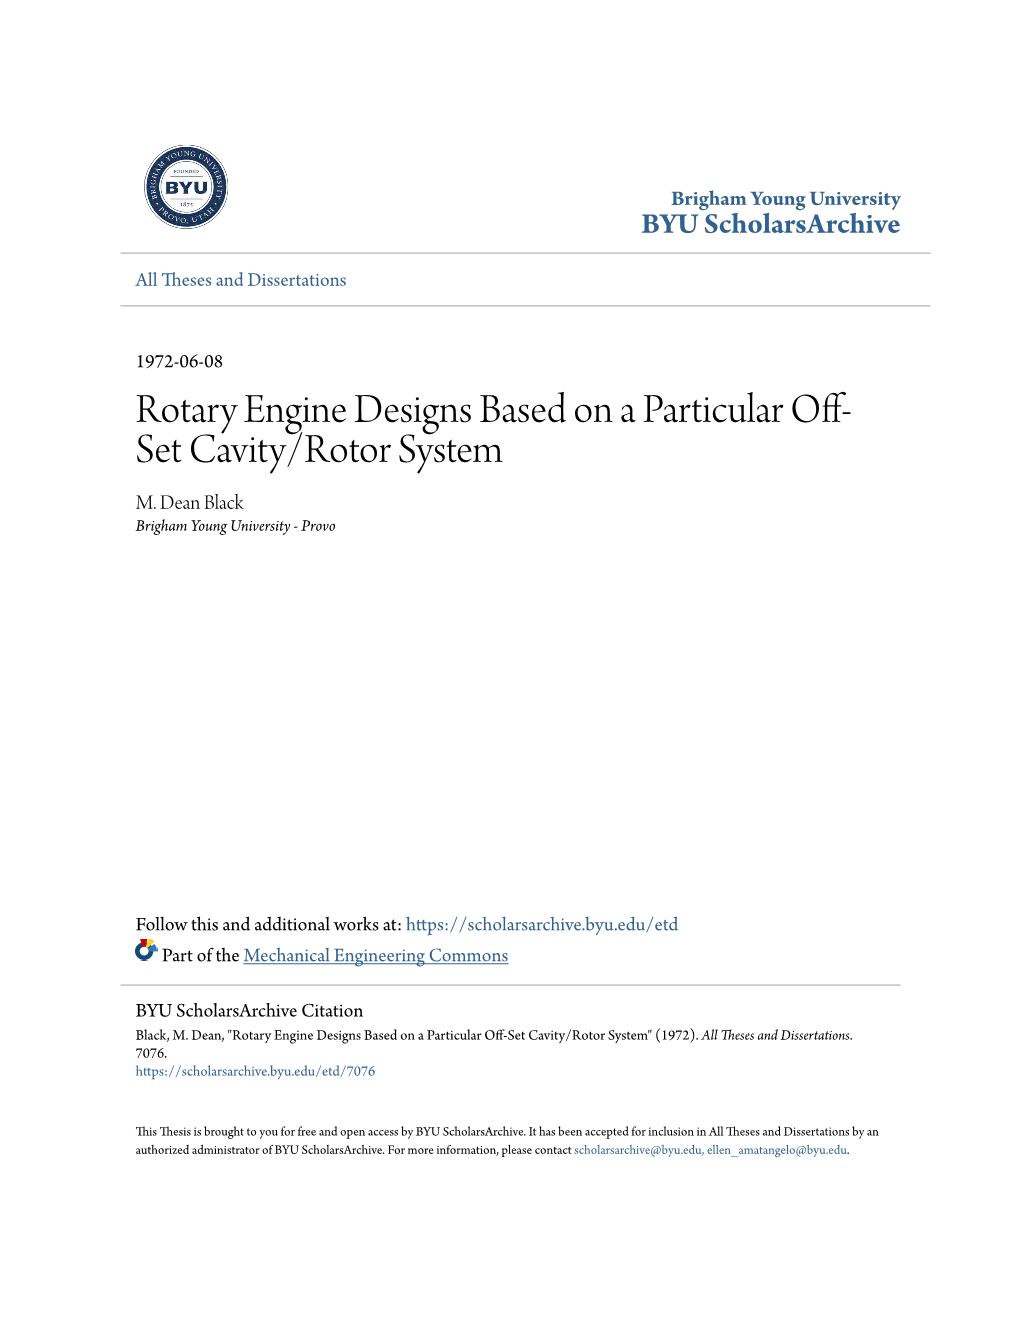 Rotary Engine Designs Based on a Particular Off-Set Cavity/Rotor System" (1972)